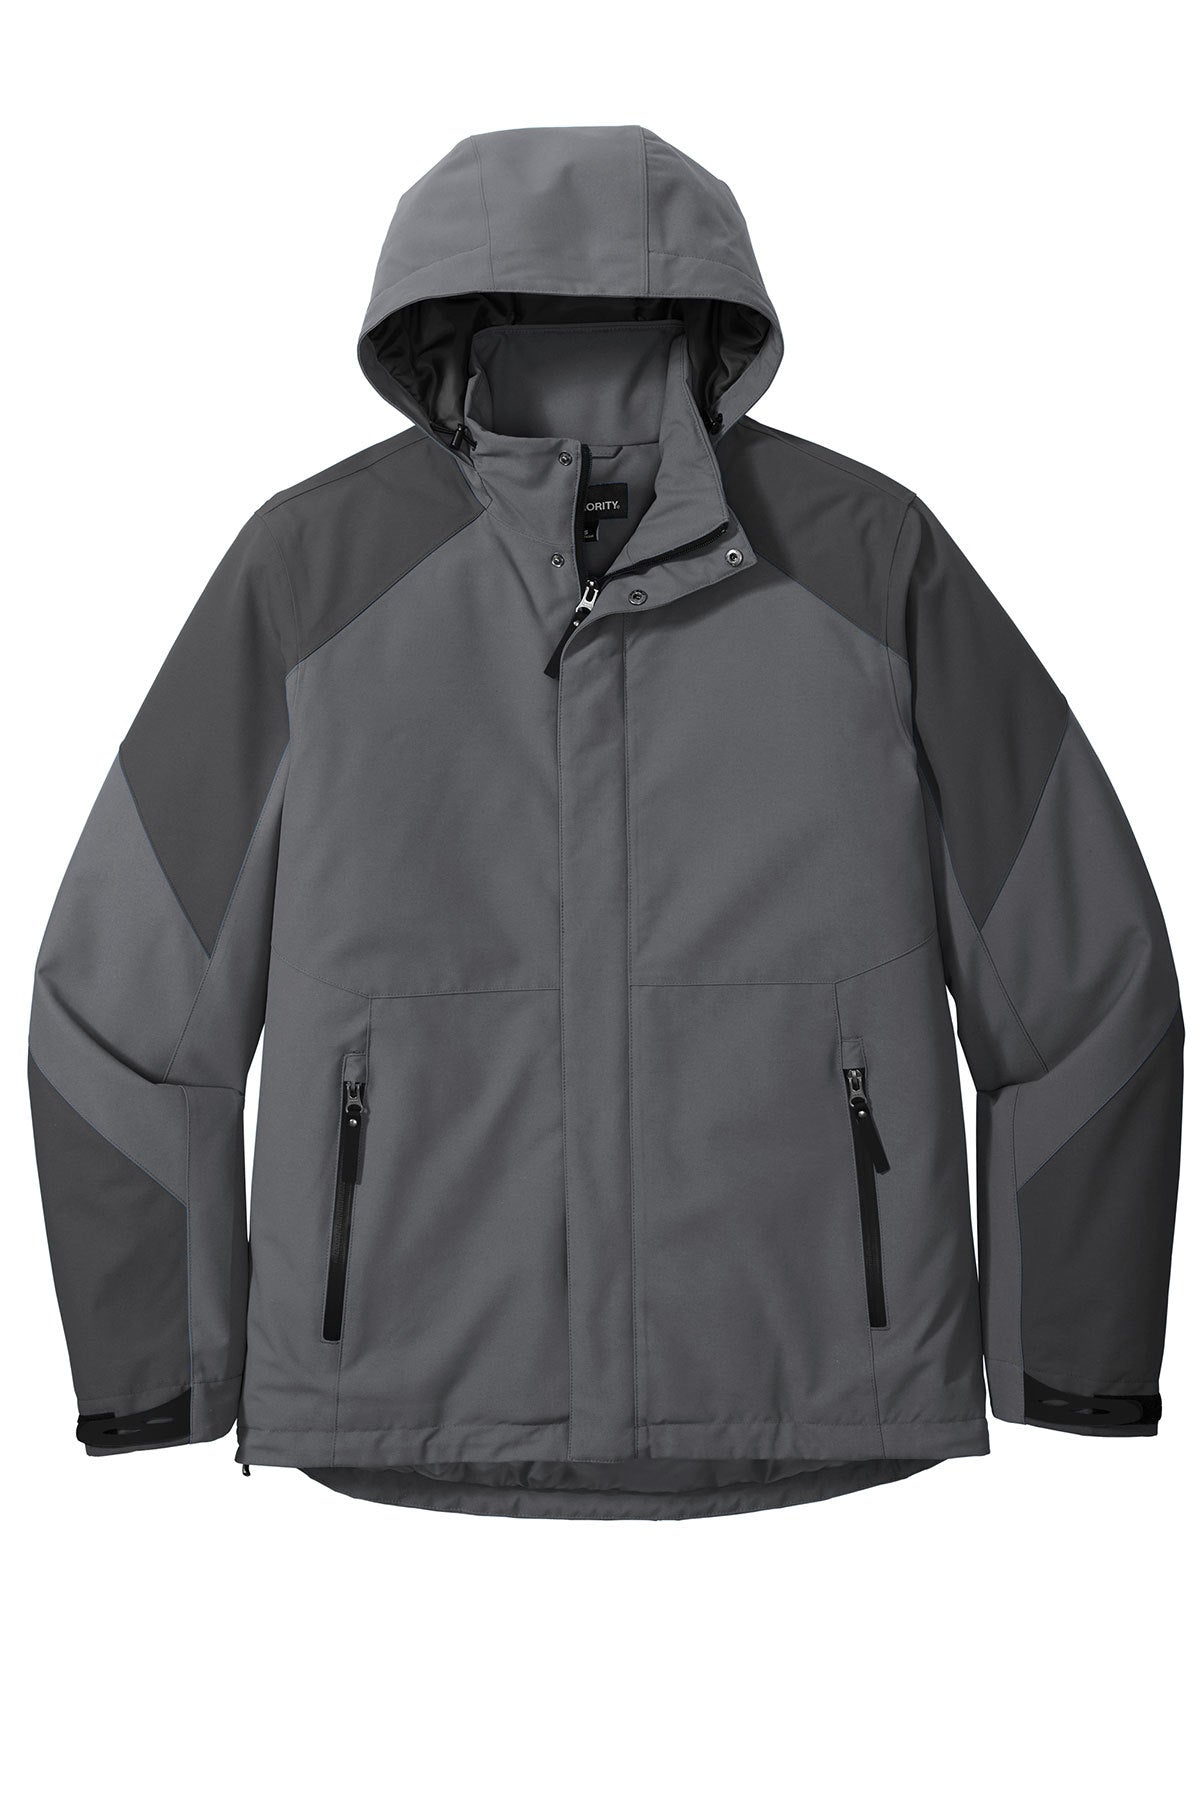 Sample Insulated Tech Jacket